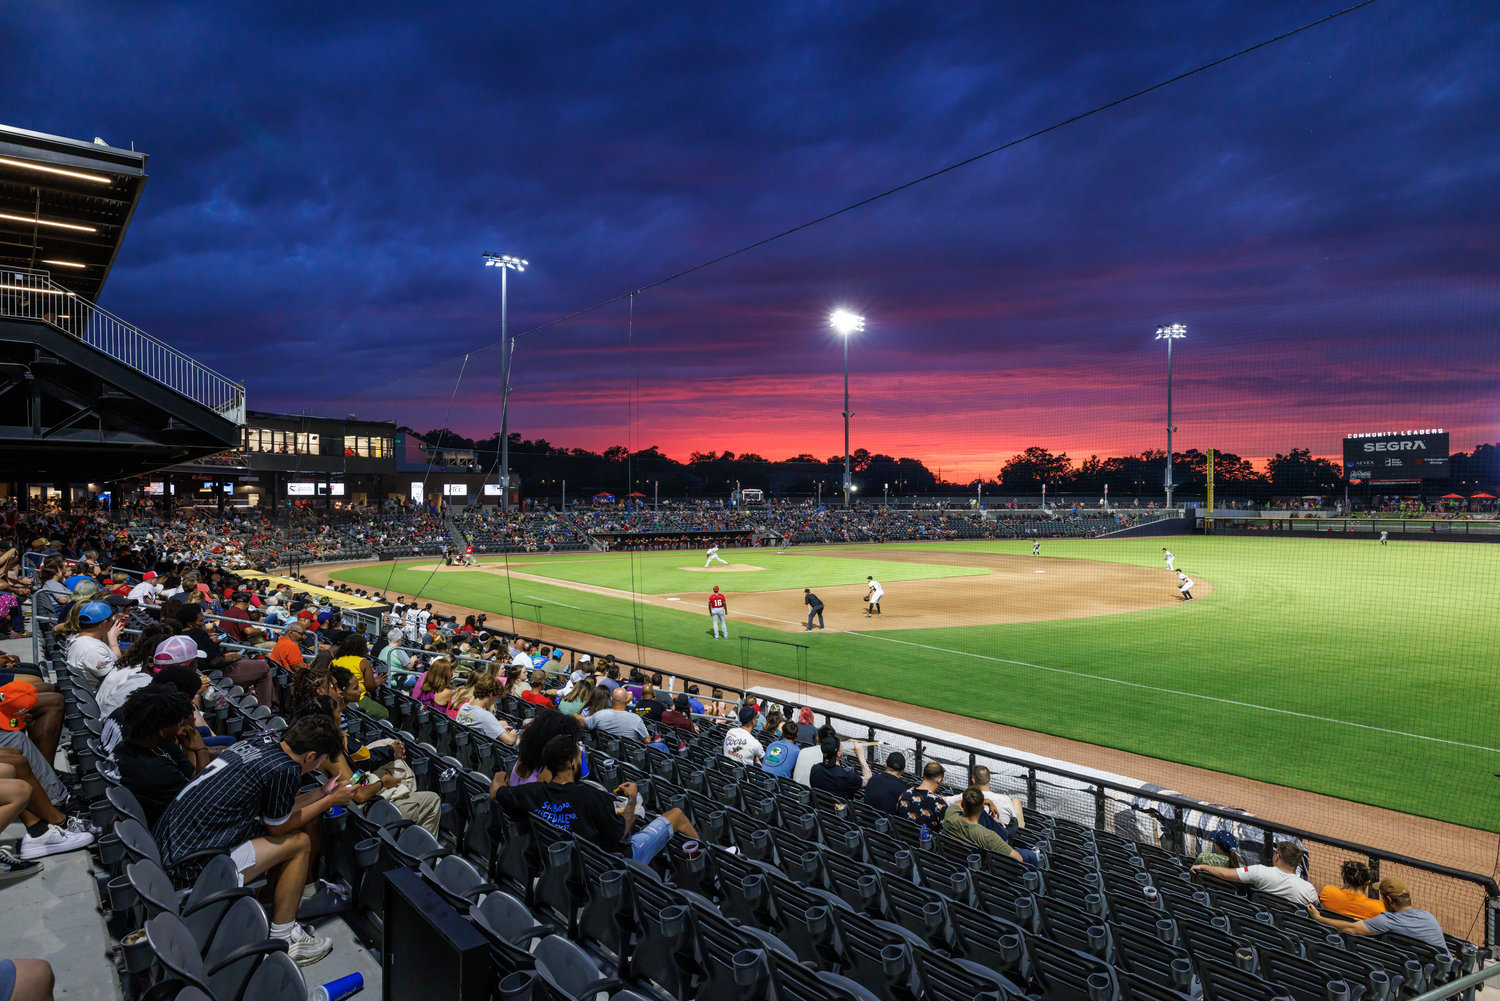 Sunset at Segra Stadium as the Fayetteville Woodpeckers host the Potomac Nationals on June 3, 2022.